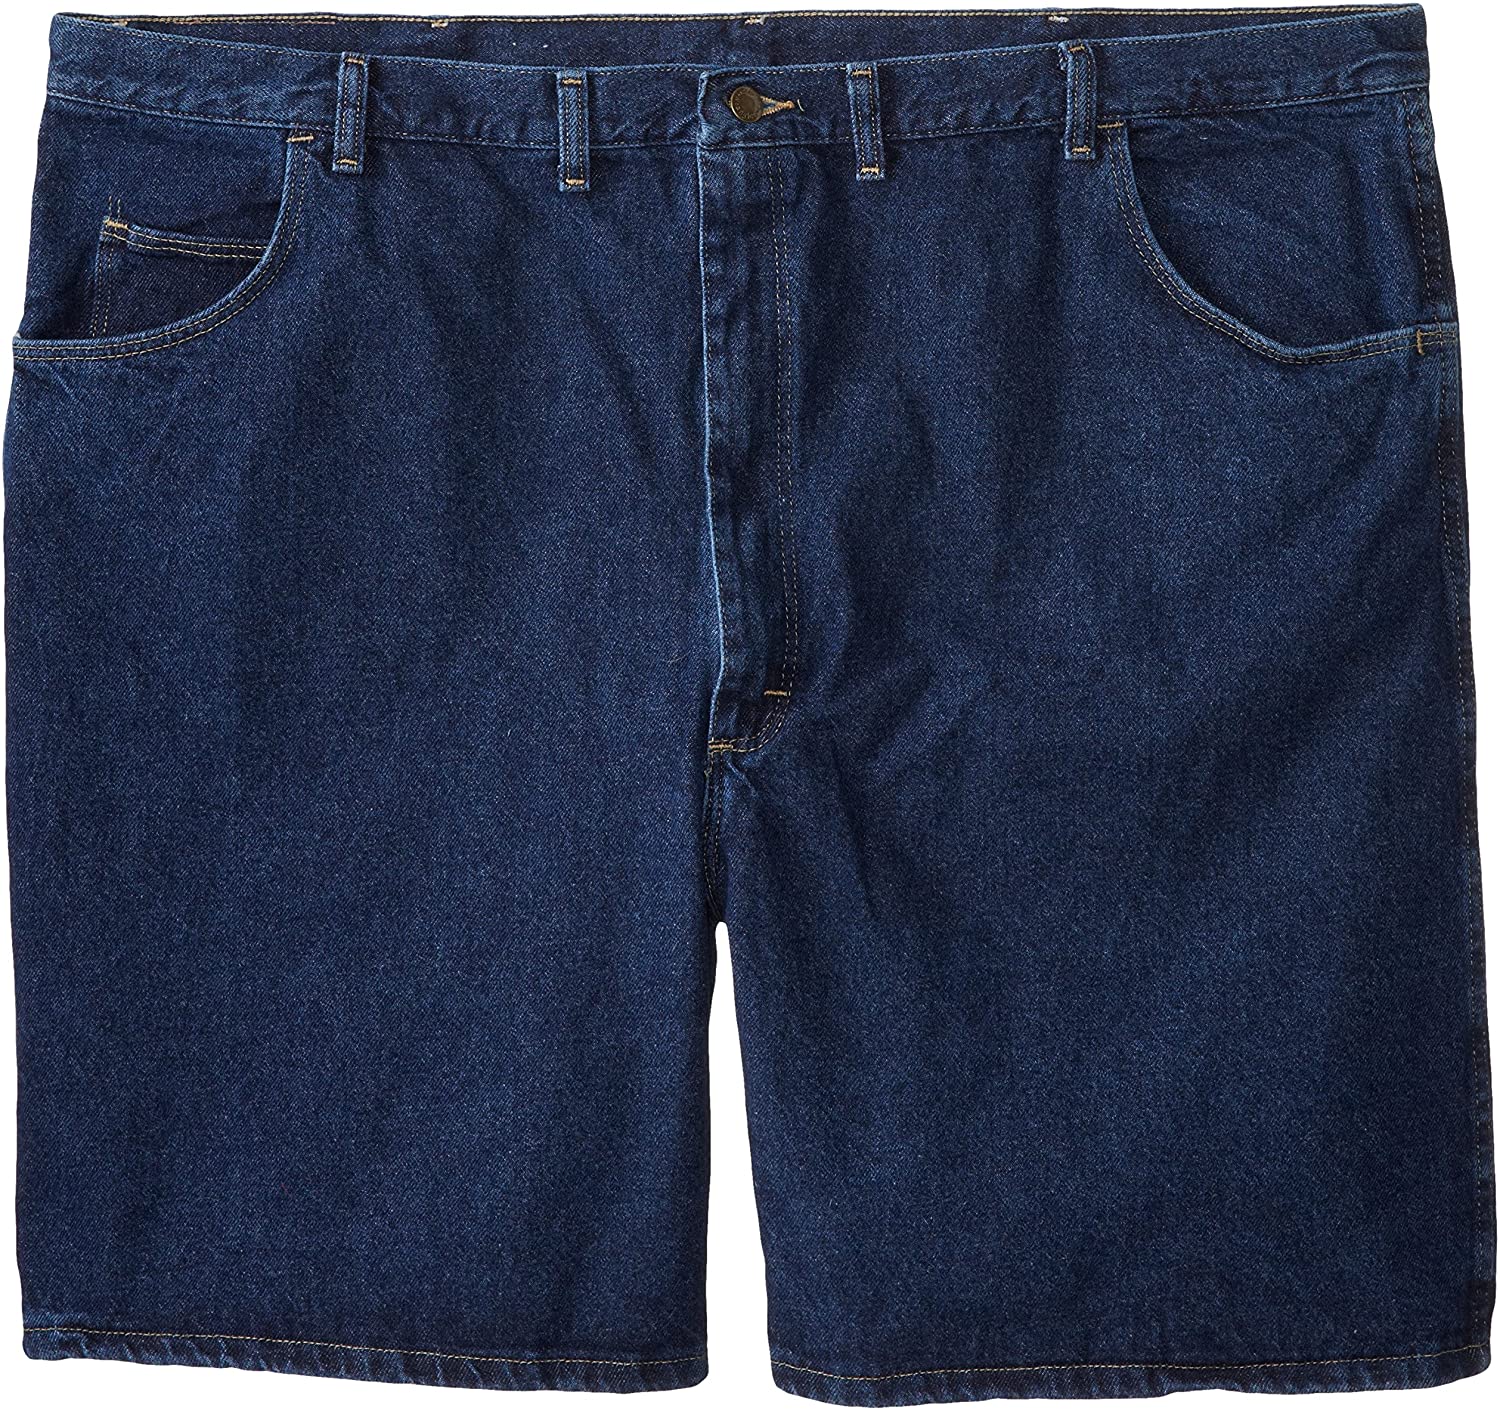 Wrangler Men's Rugged Wear Big & Tall Relaxed-Fit Short 